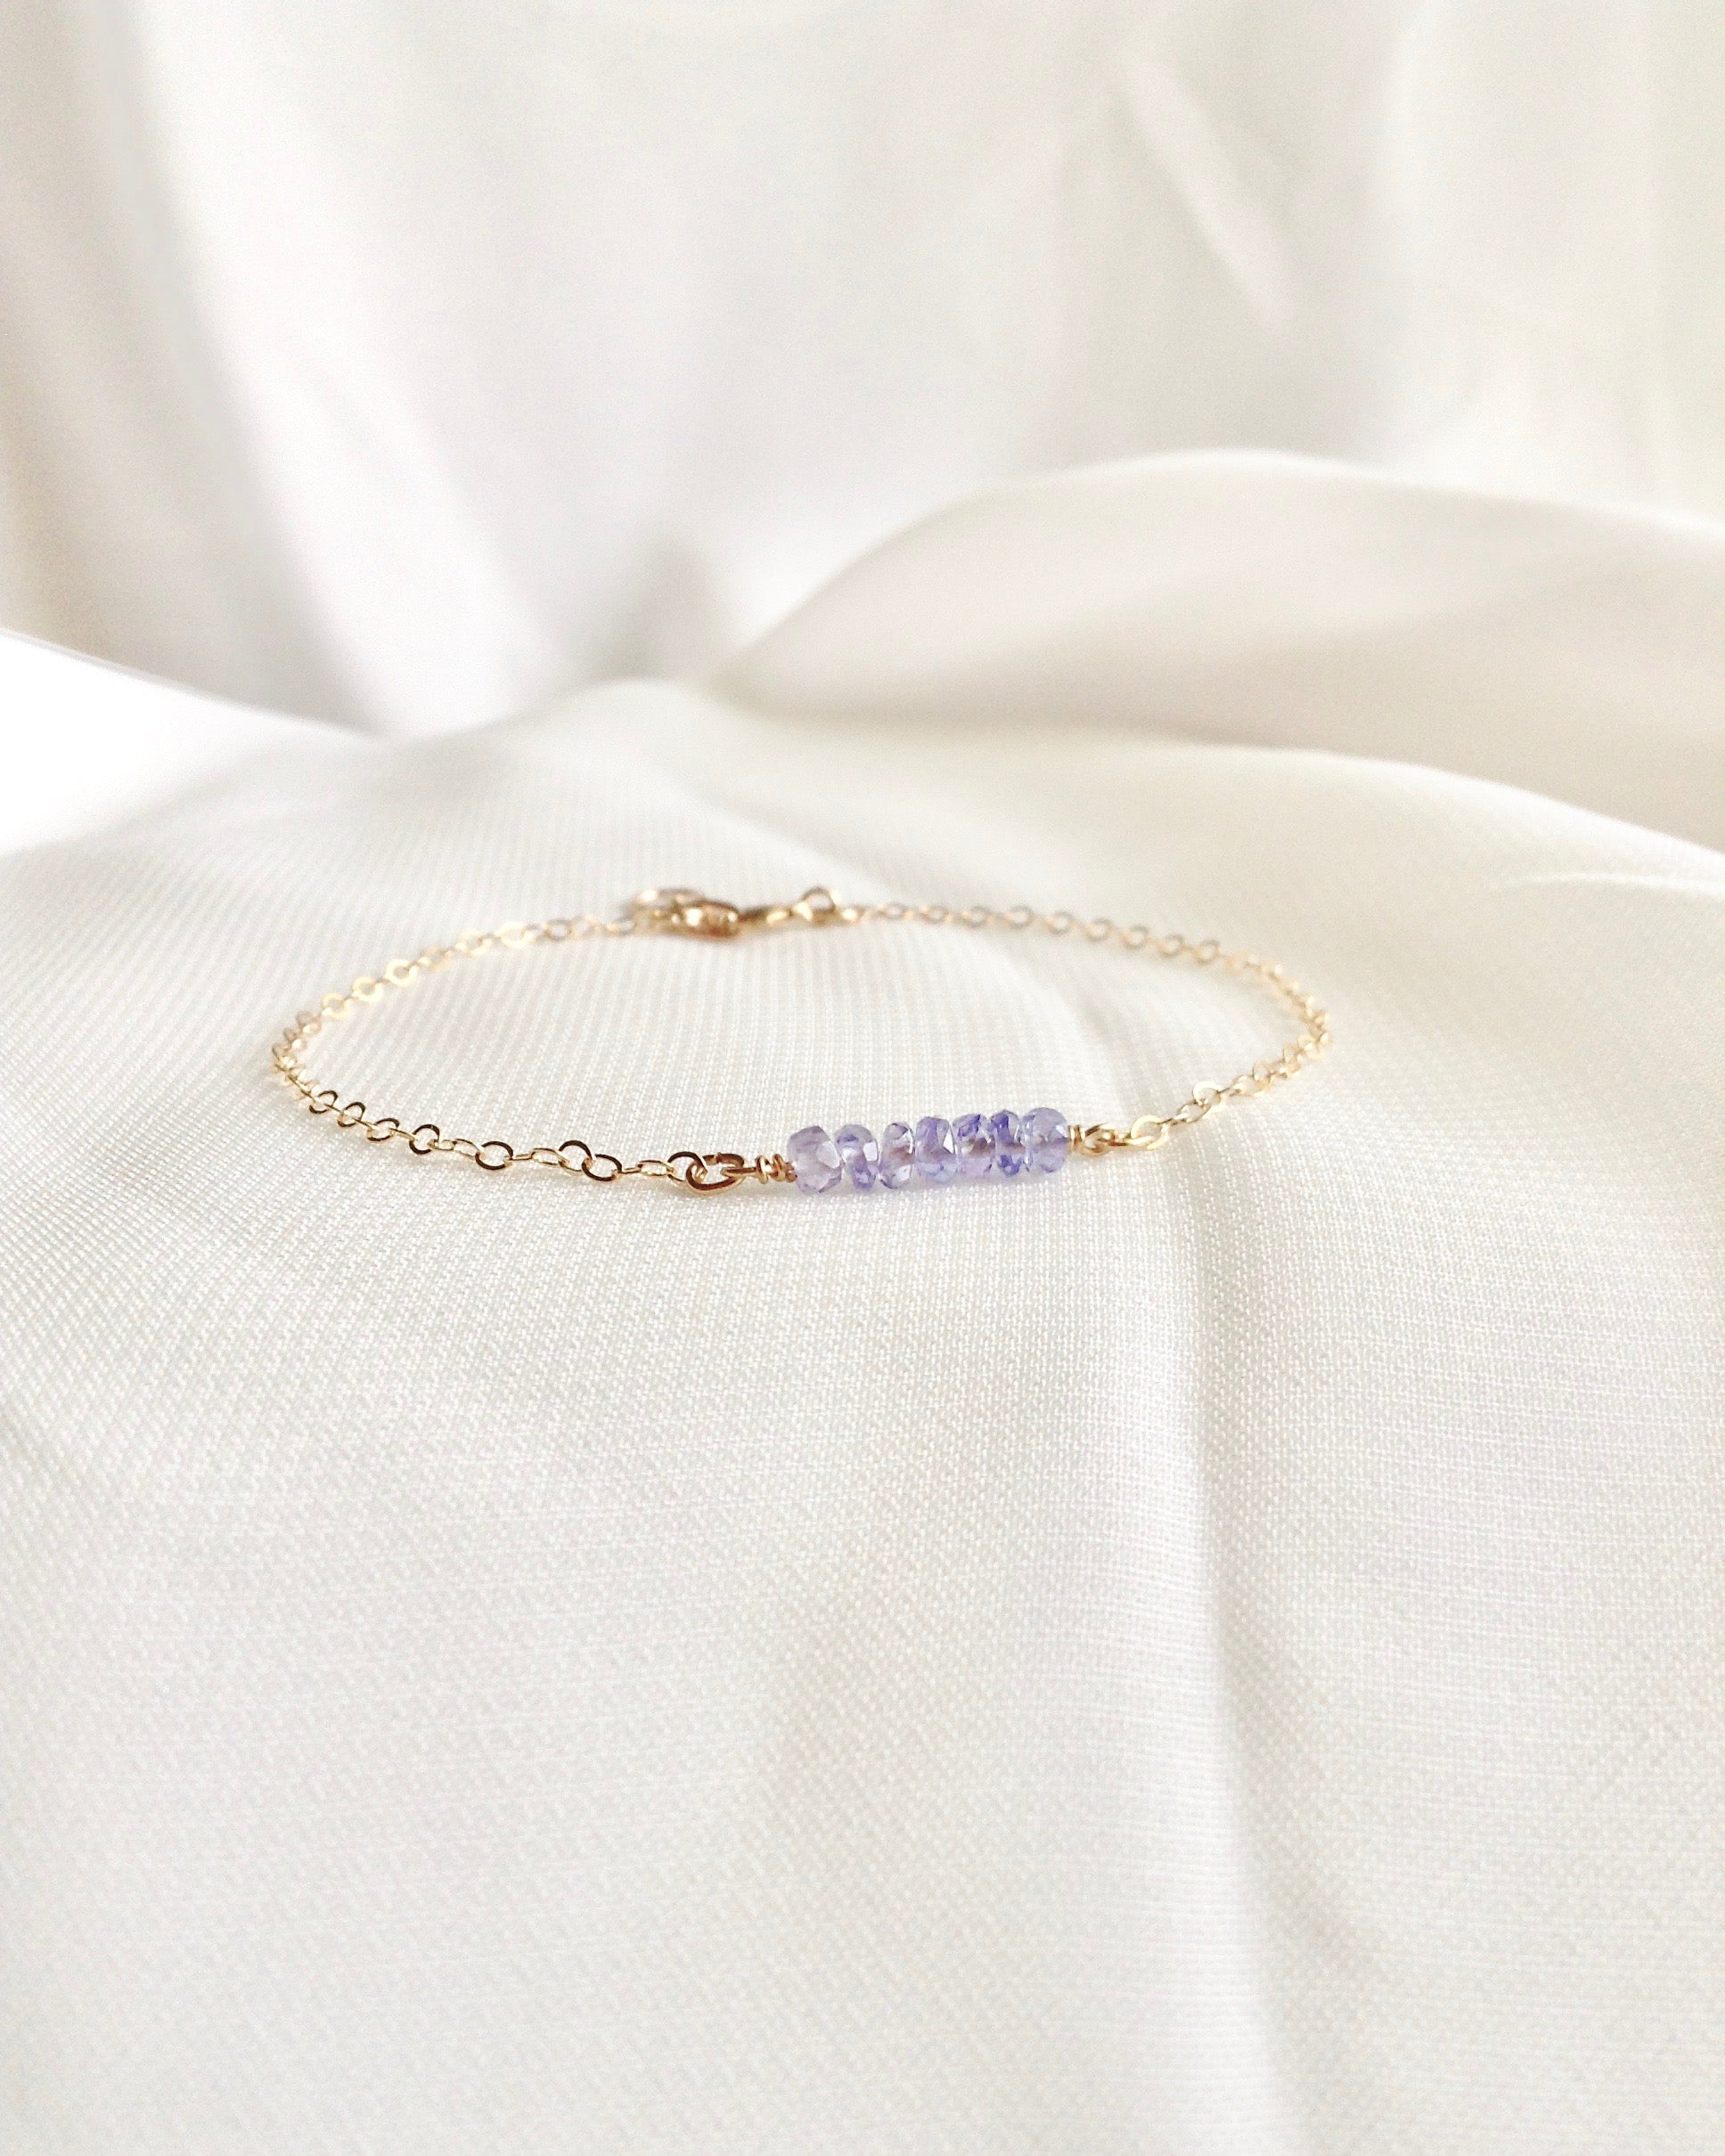 Tanzanite Bracelet in Gold Filled or Sterling Silver | IB Jewelry